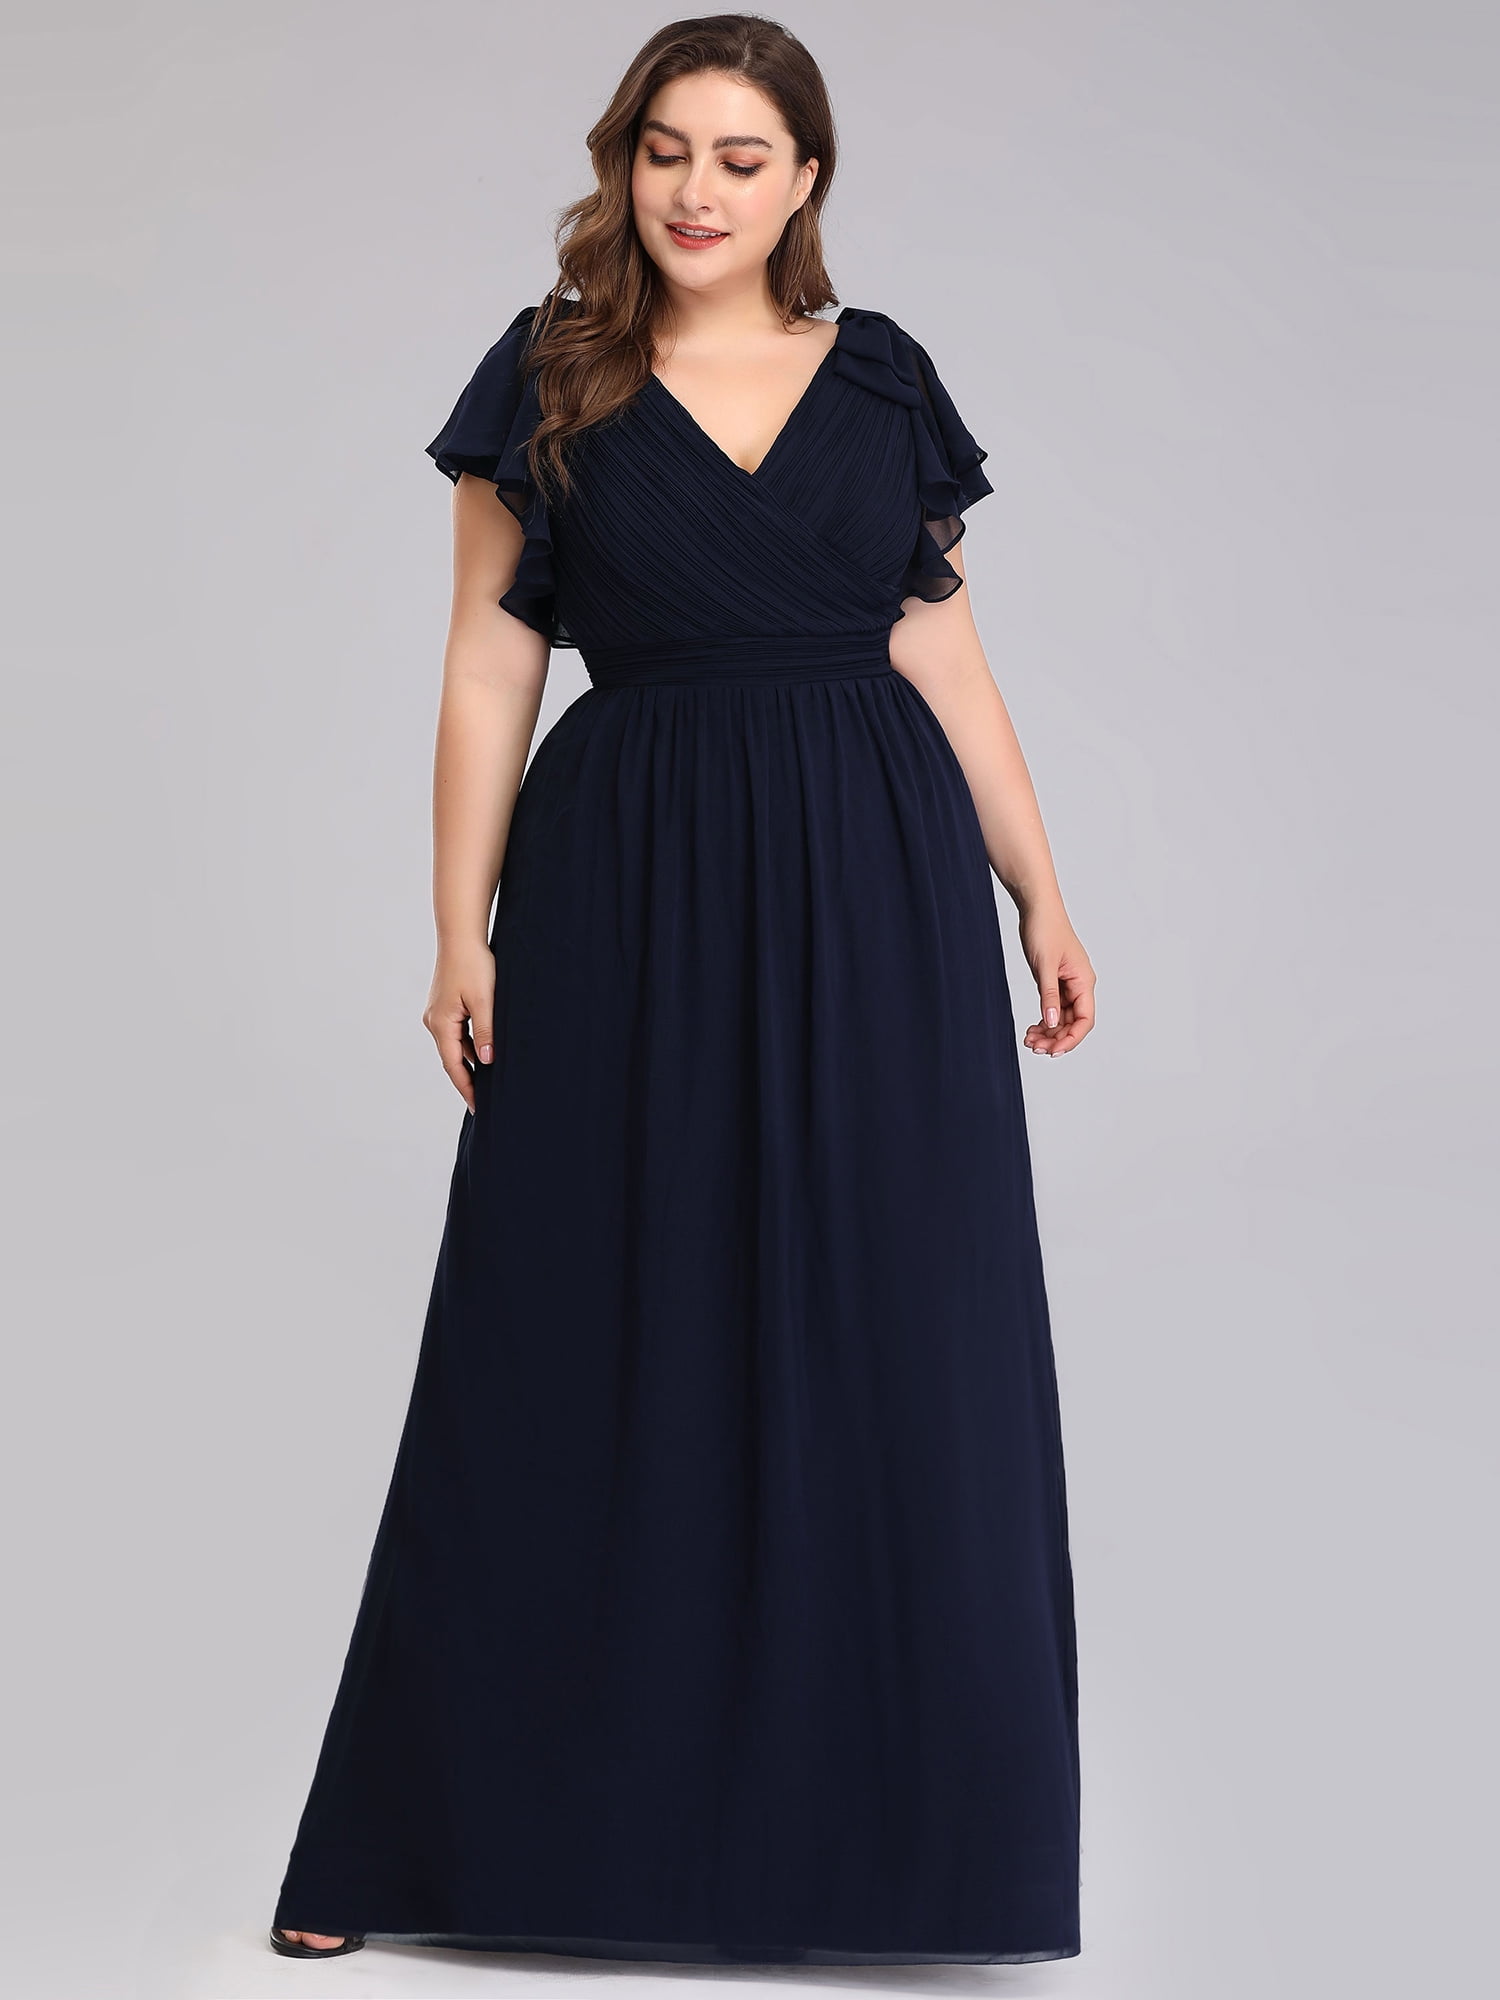 clearance plus size formal dresses